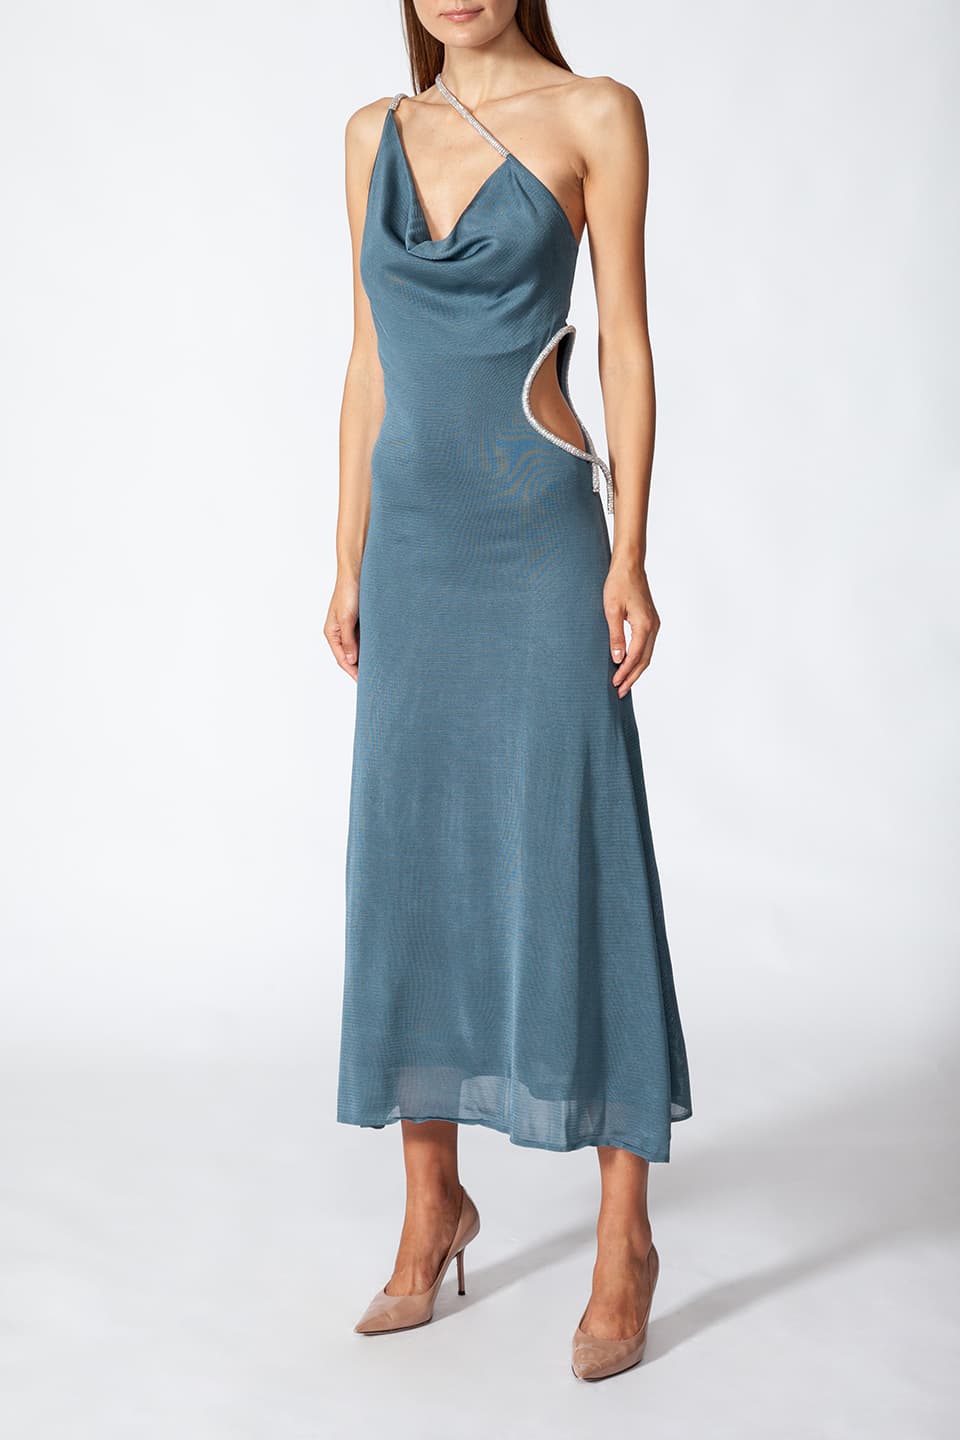 Thumbnail for Product gallery 3, Model in a natural frontal pose while wearing midi length dress featuring cut out details in petrol blue color, from Kukhareva London fashion stylist